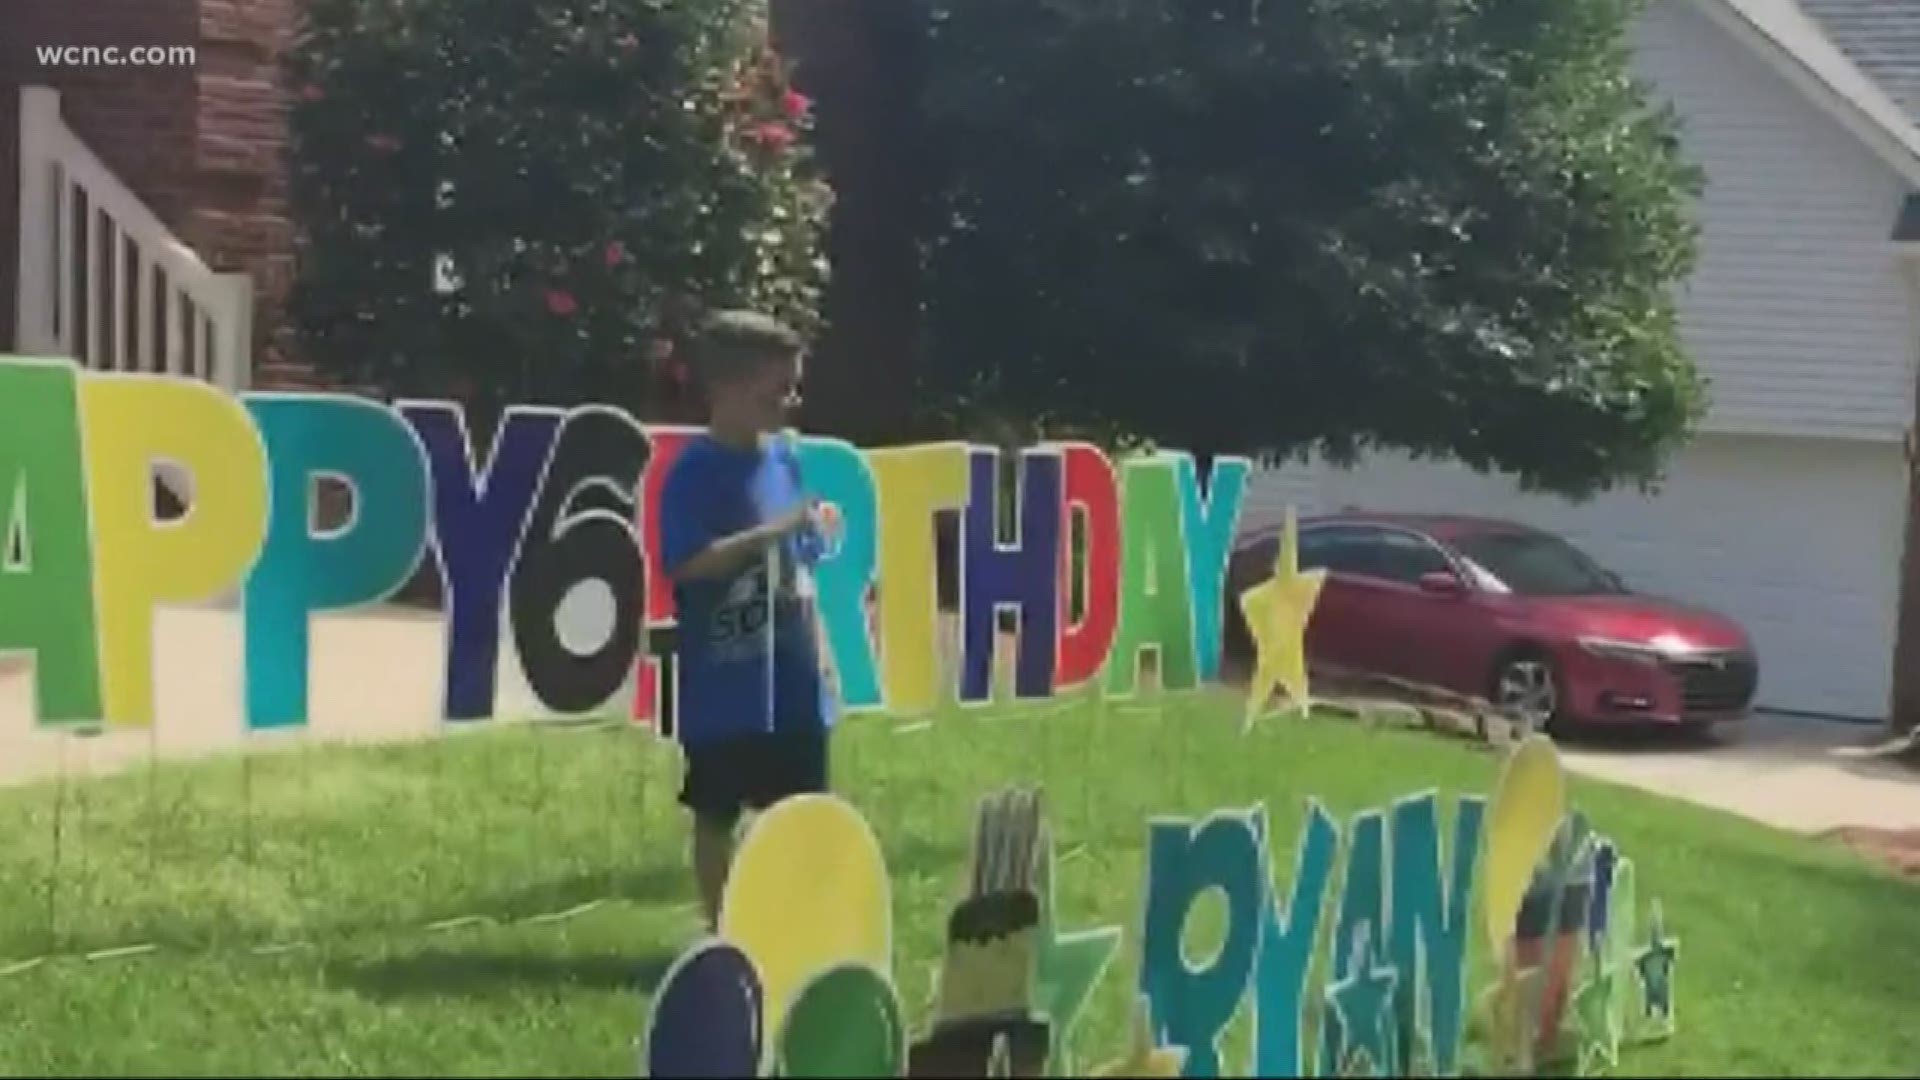 His 6th birthday party was canceled due to the coronavirus, so it was replaced with a parade of his family and friends.